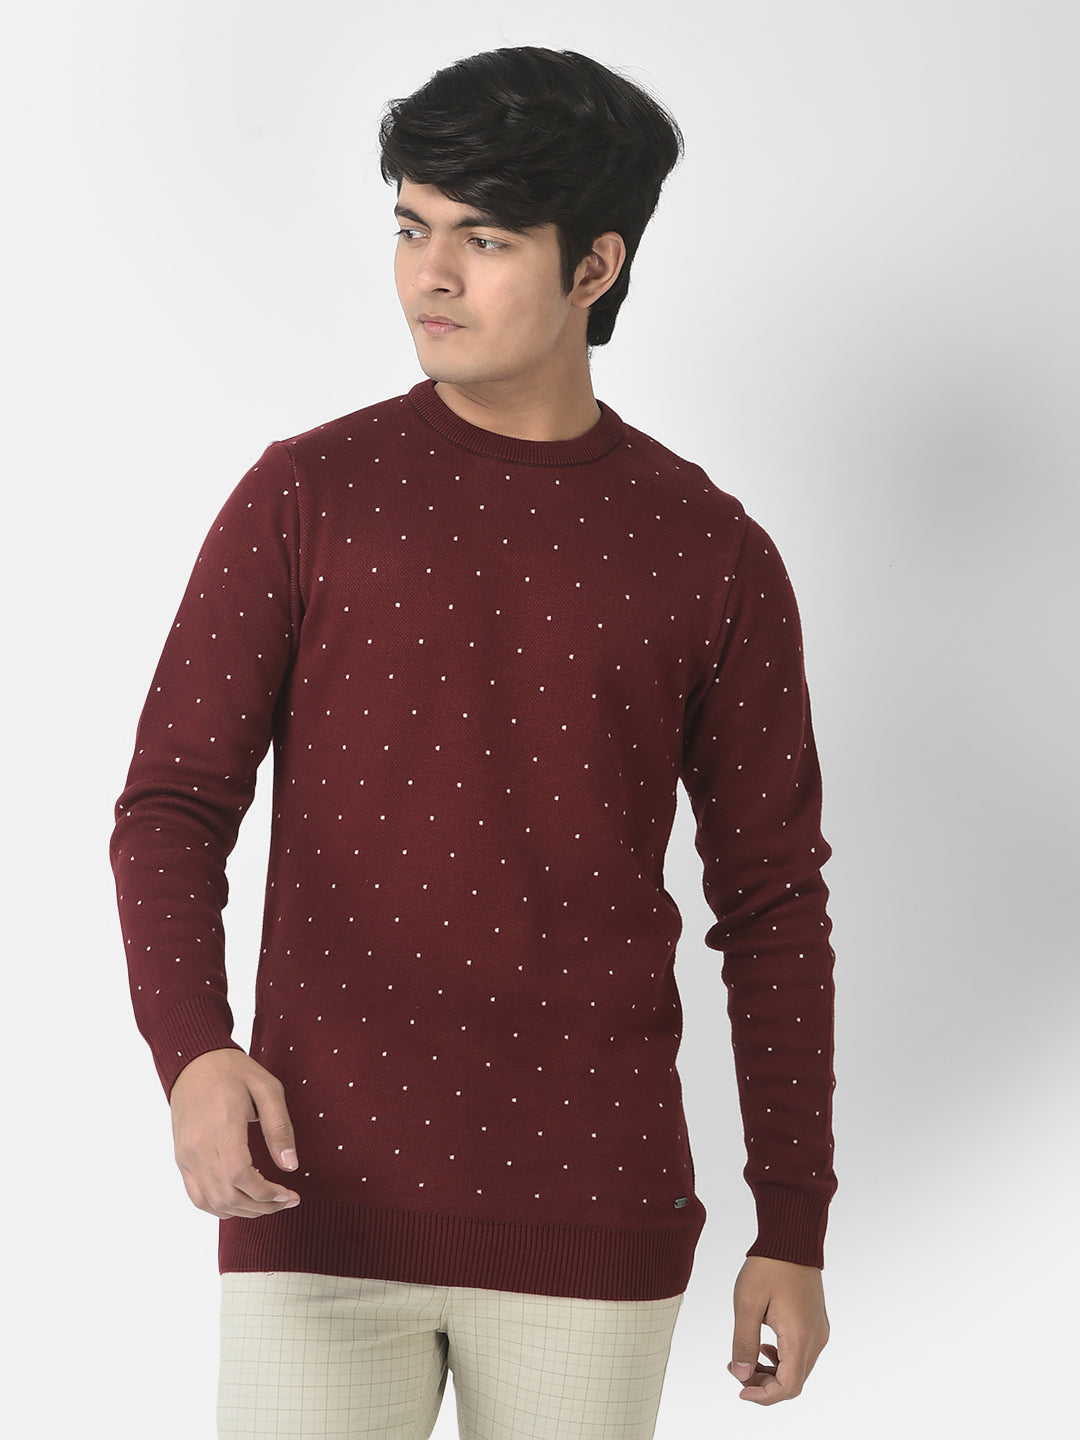  Maroon Polka-Dotted Sweater